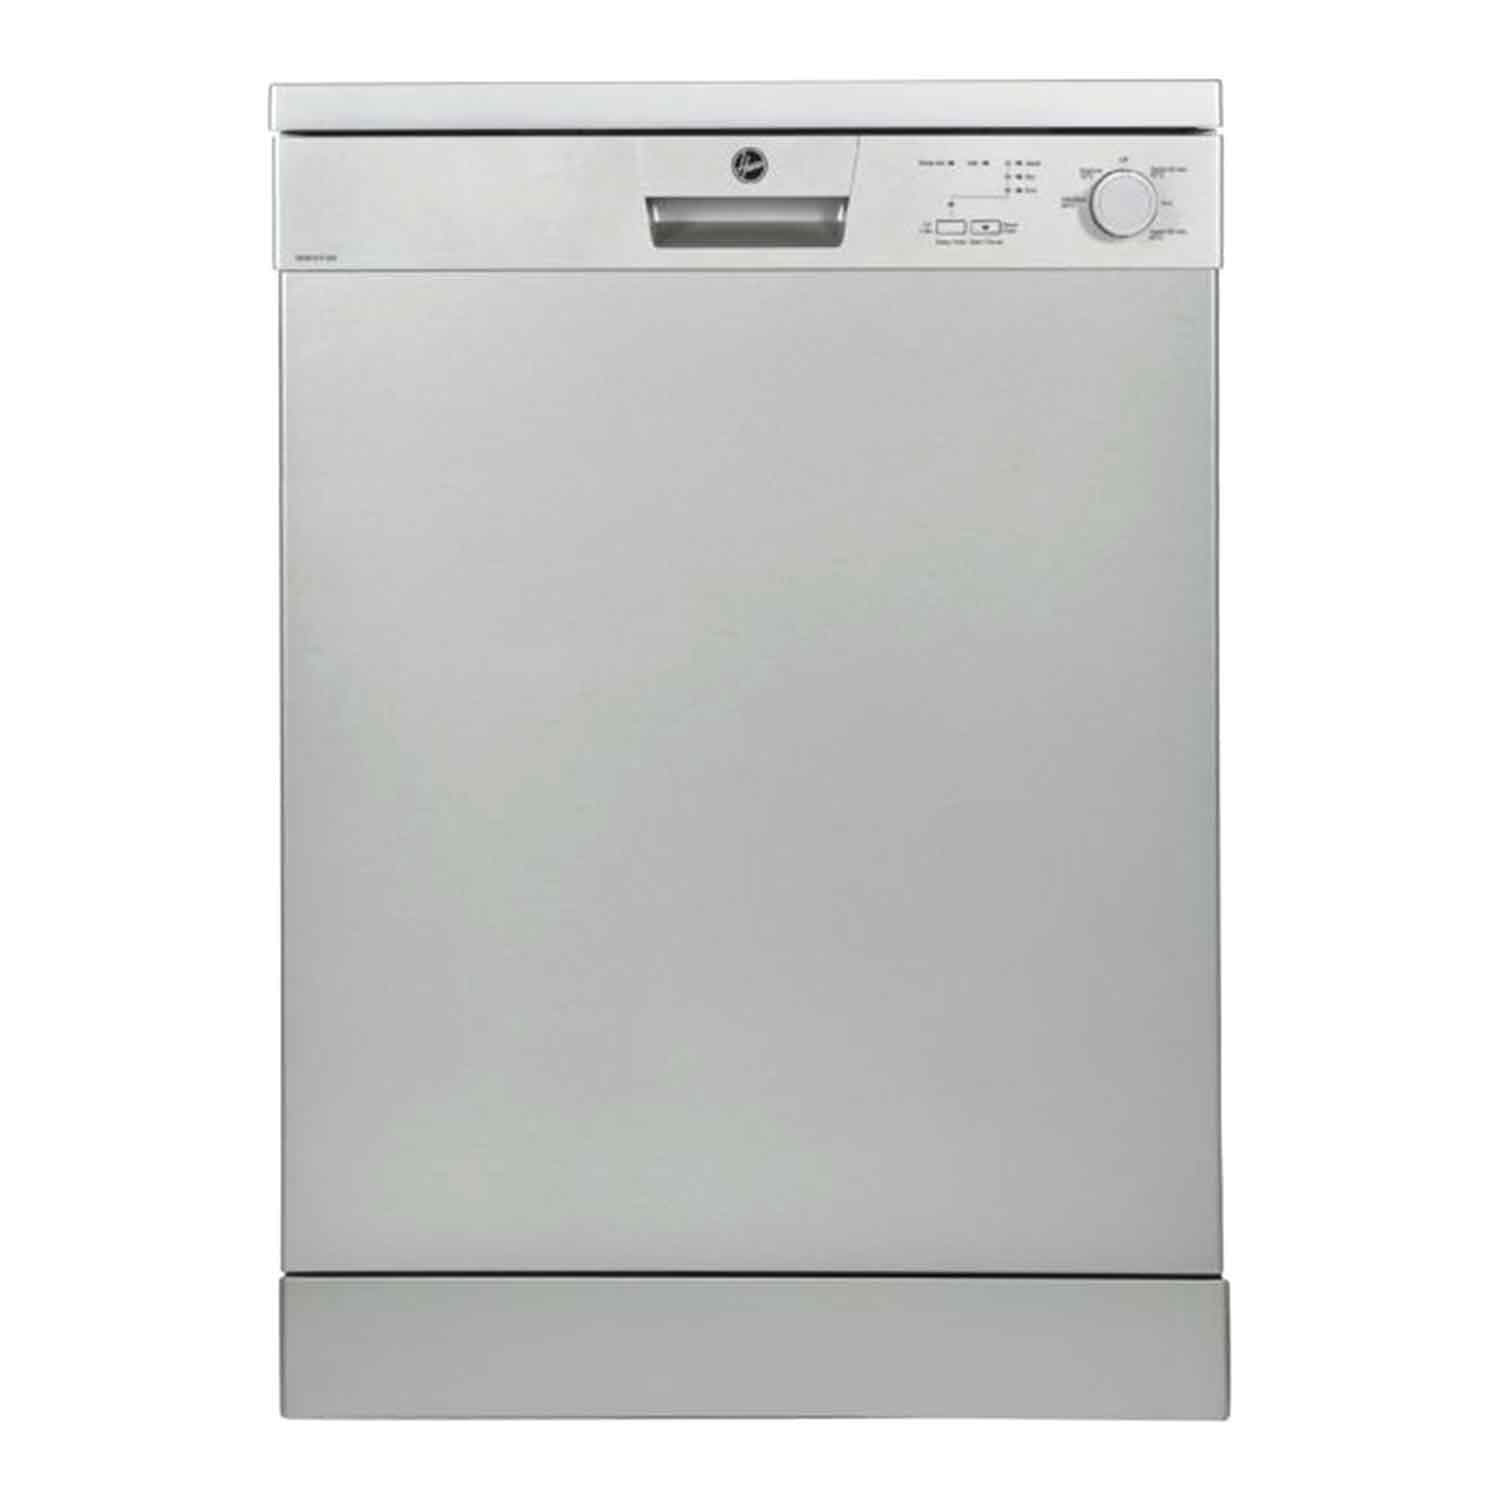 Hoover 12 Place Setting Dishwasher - Silver - HDW1217-S - Jashanmal Home